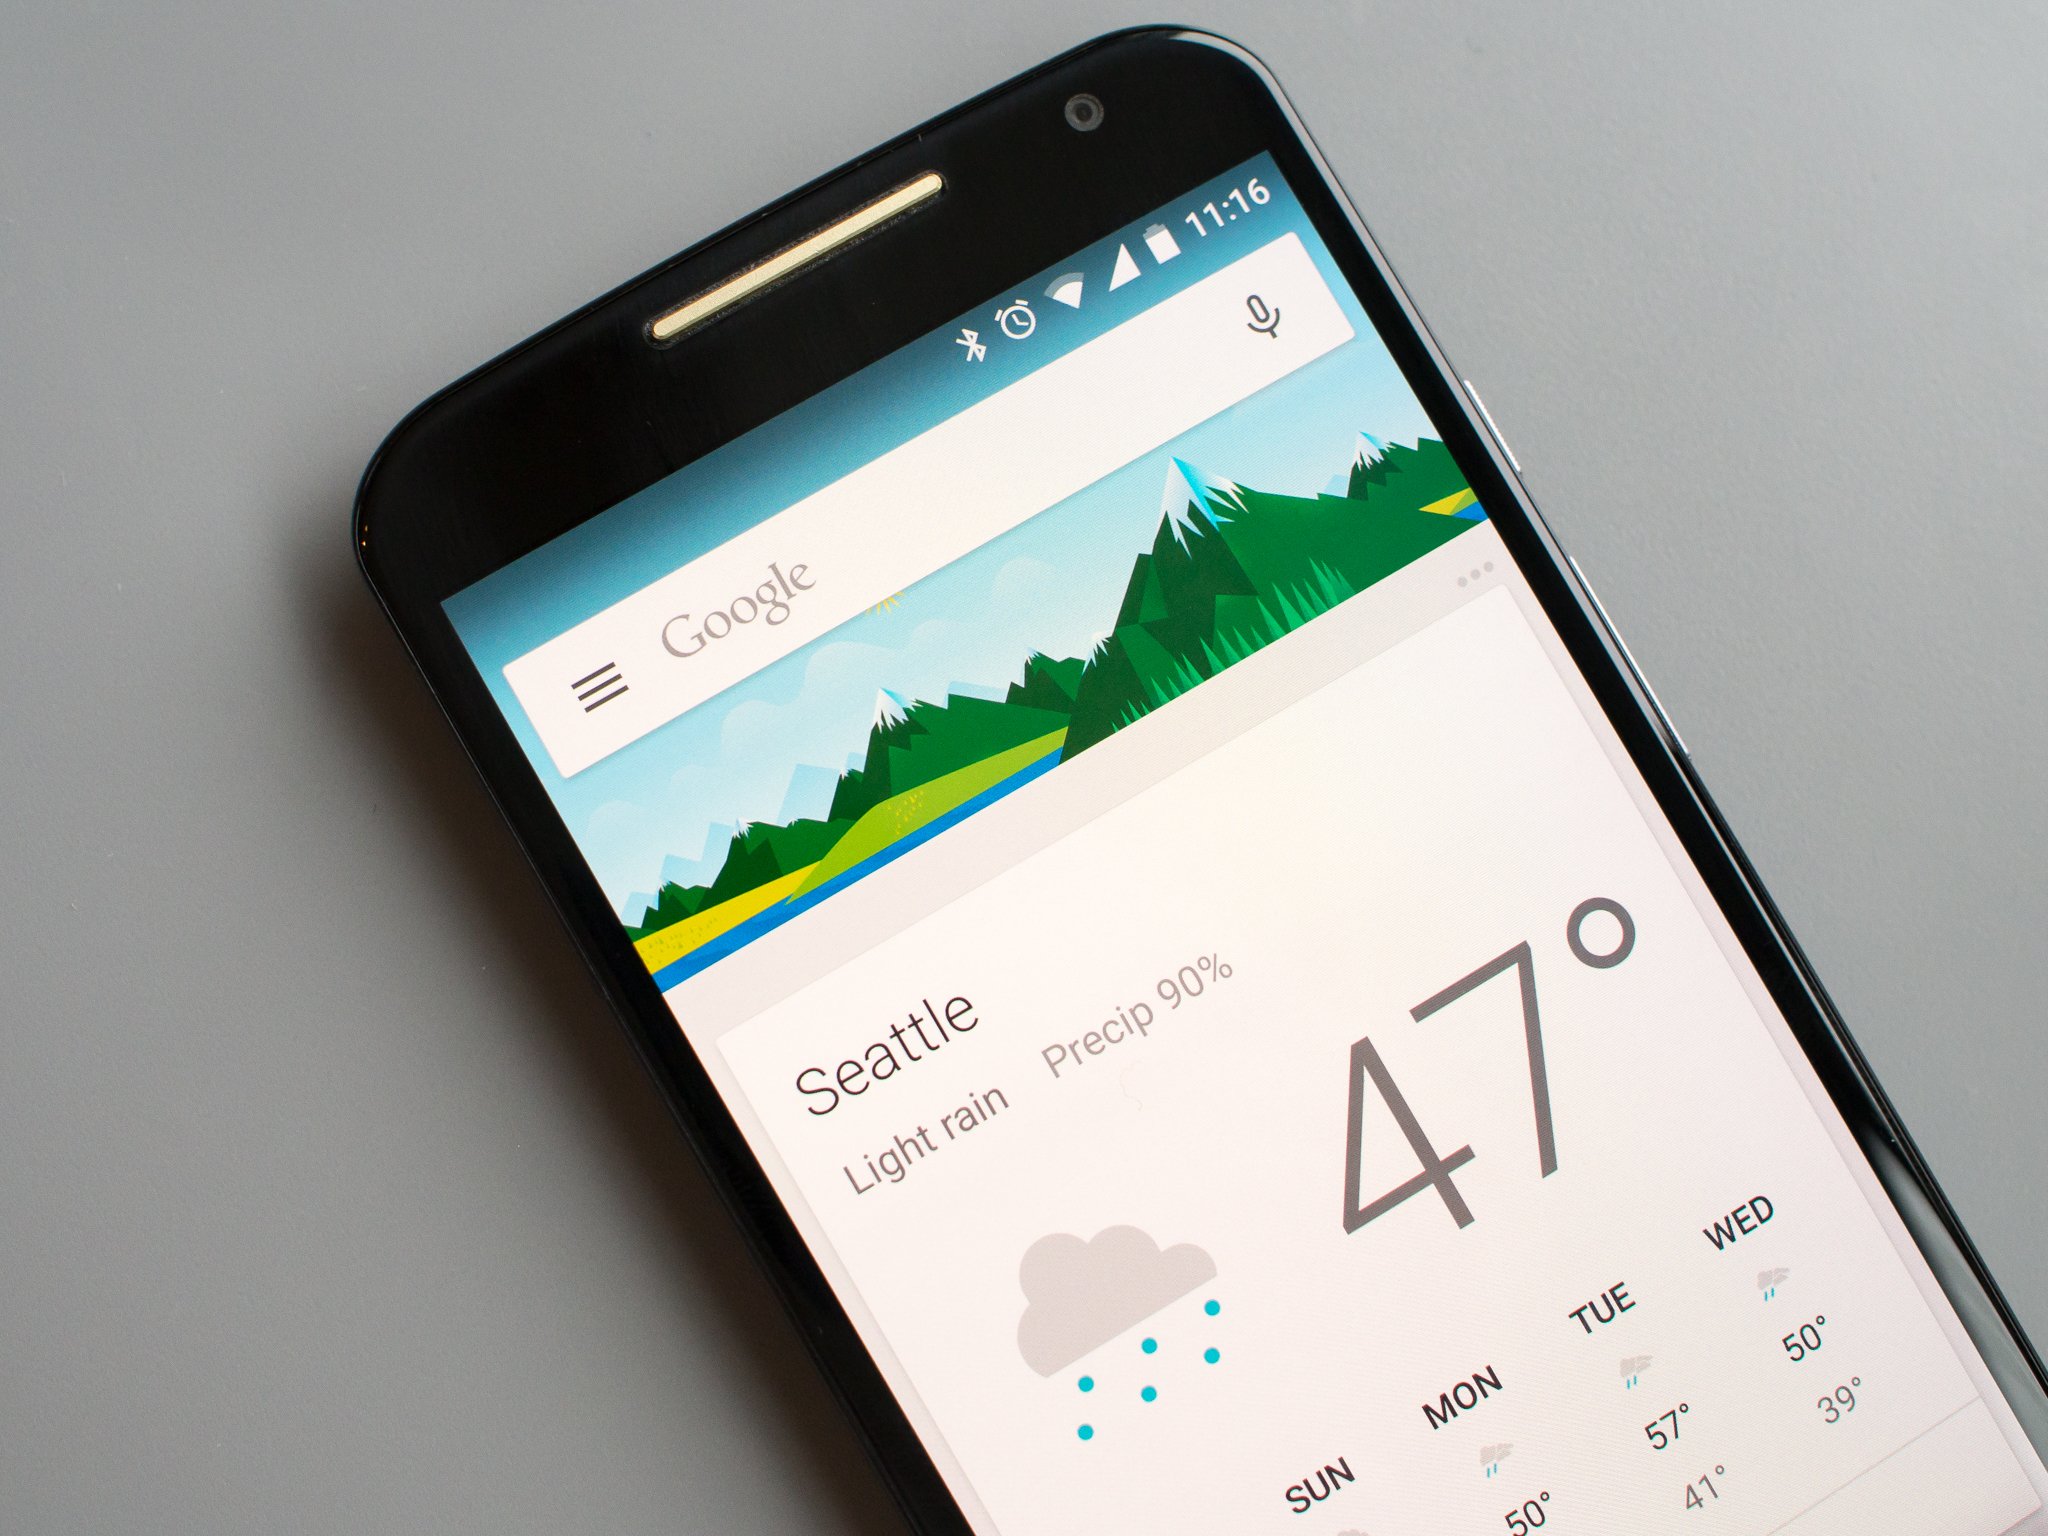 Google Now adds 70 more third-party apps